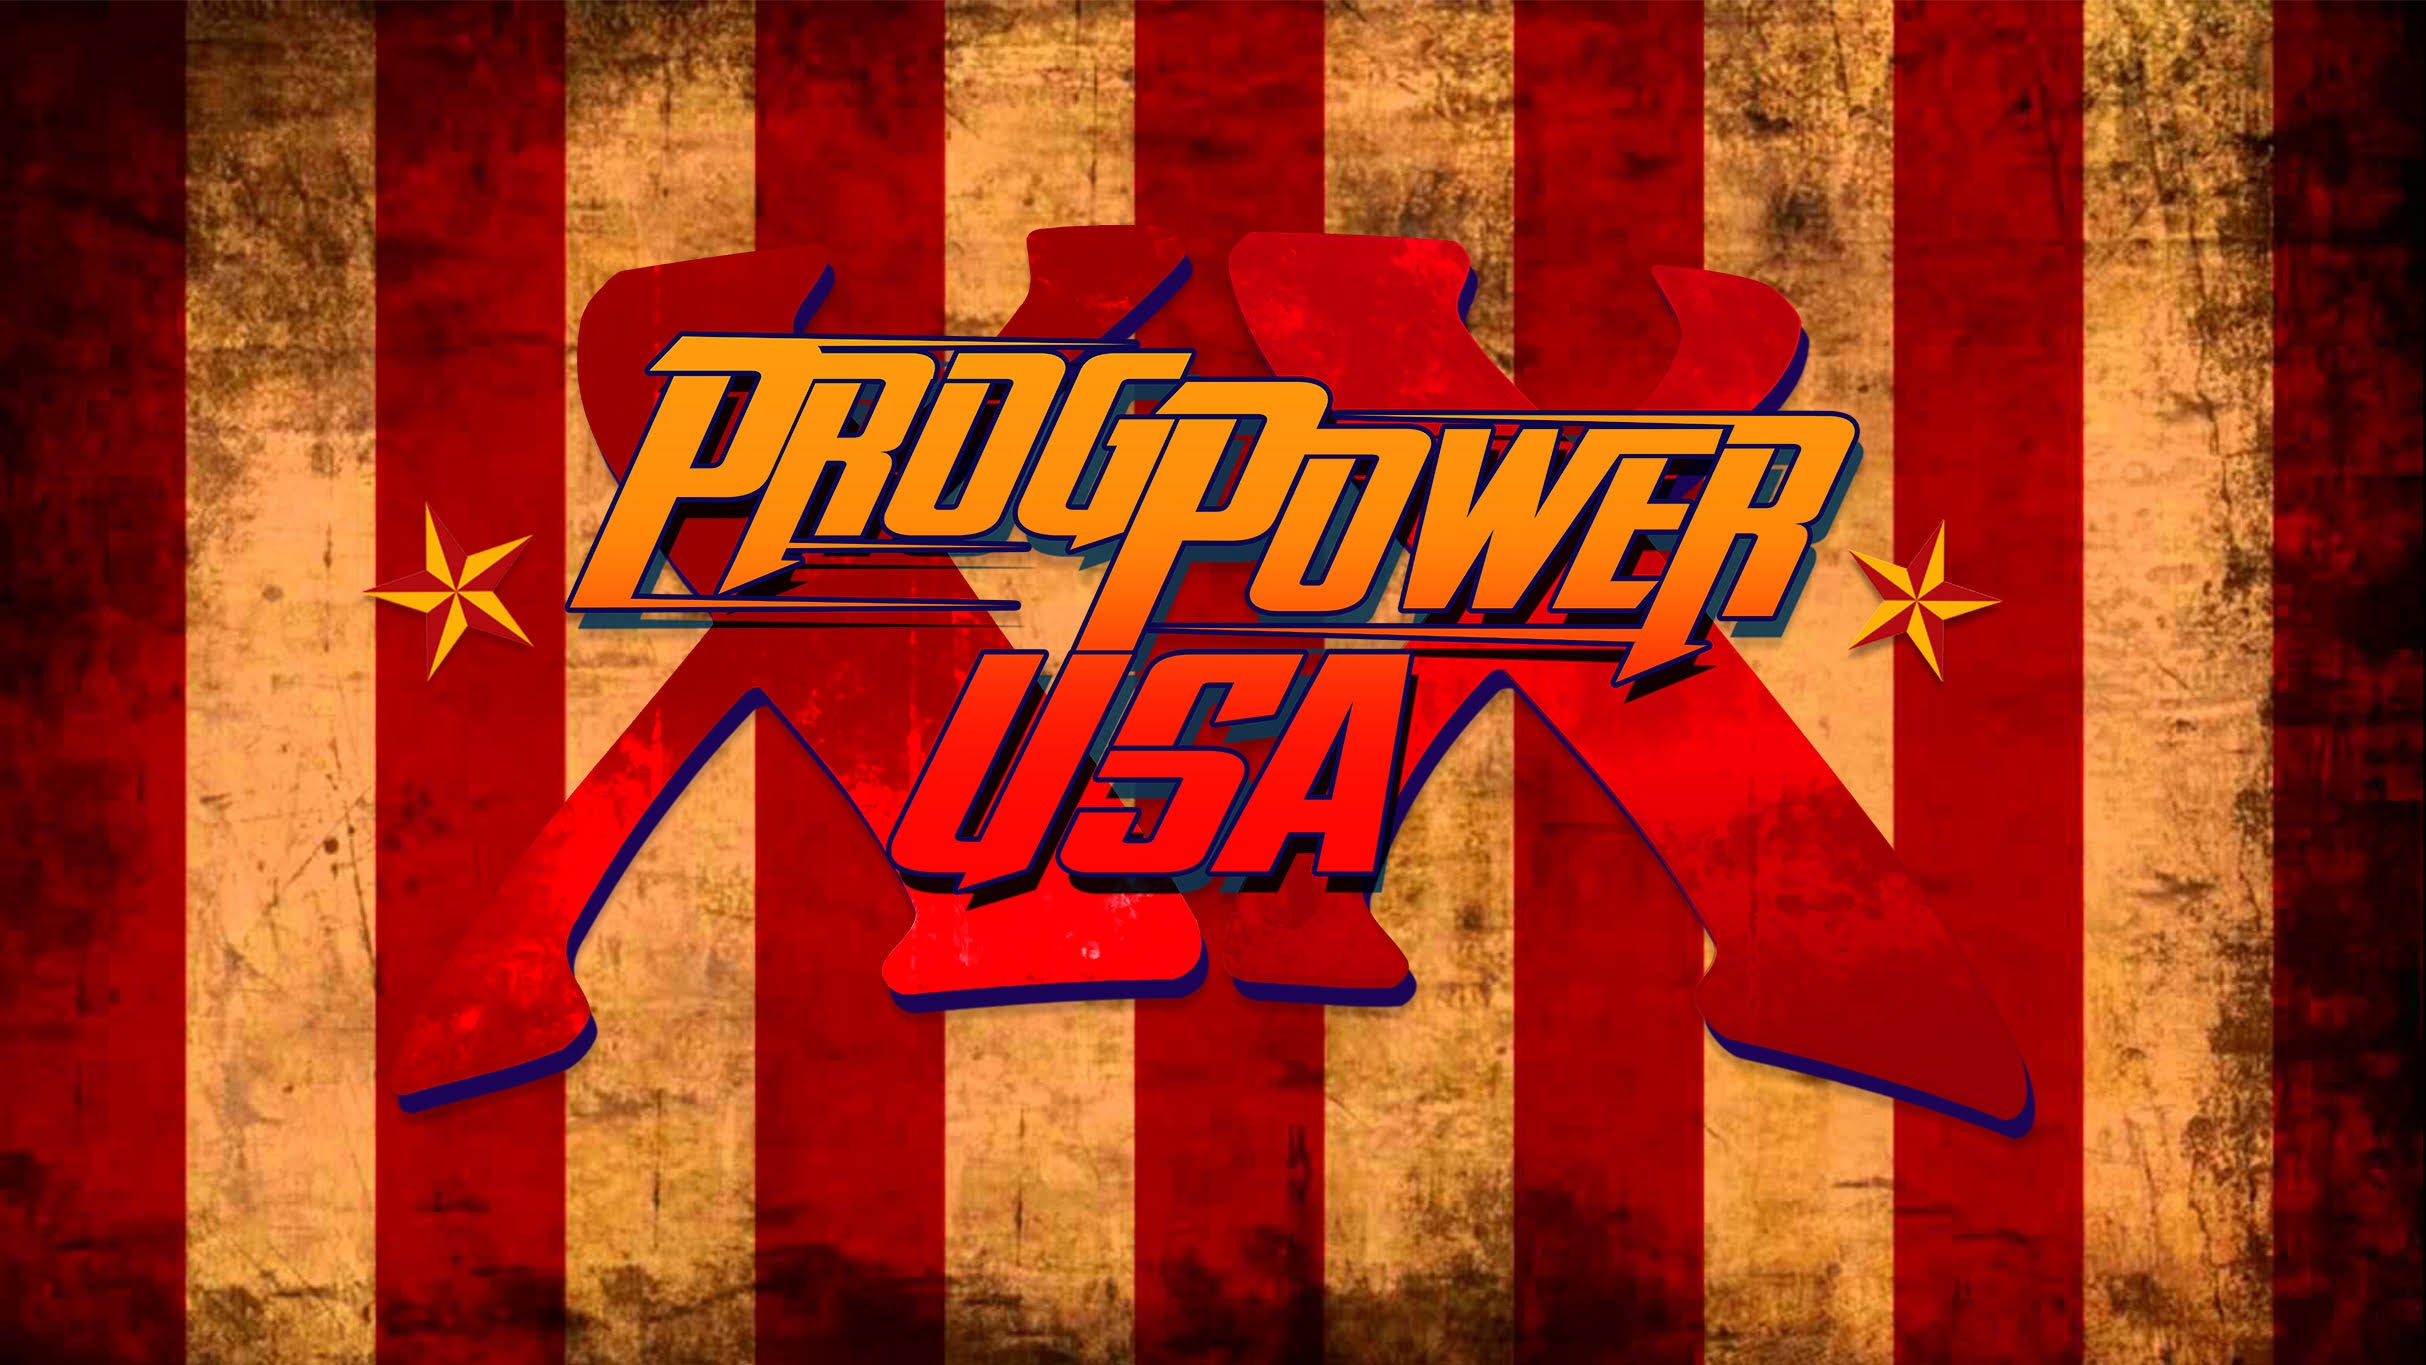 ProgPower USA XXIII Day 1 at Center Stage Theater